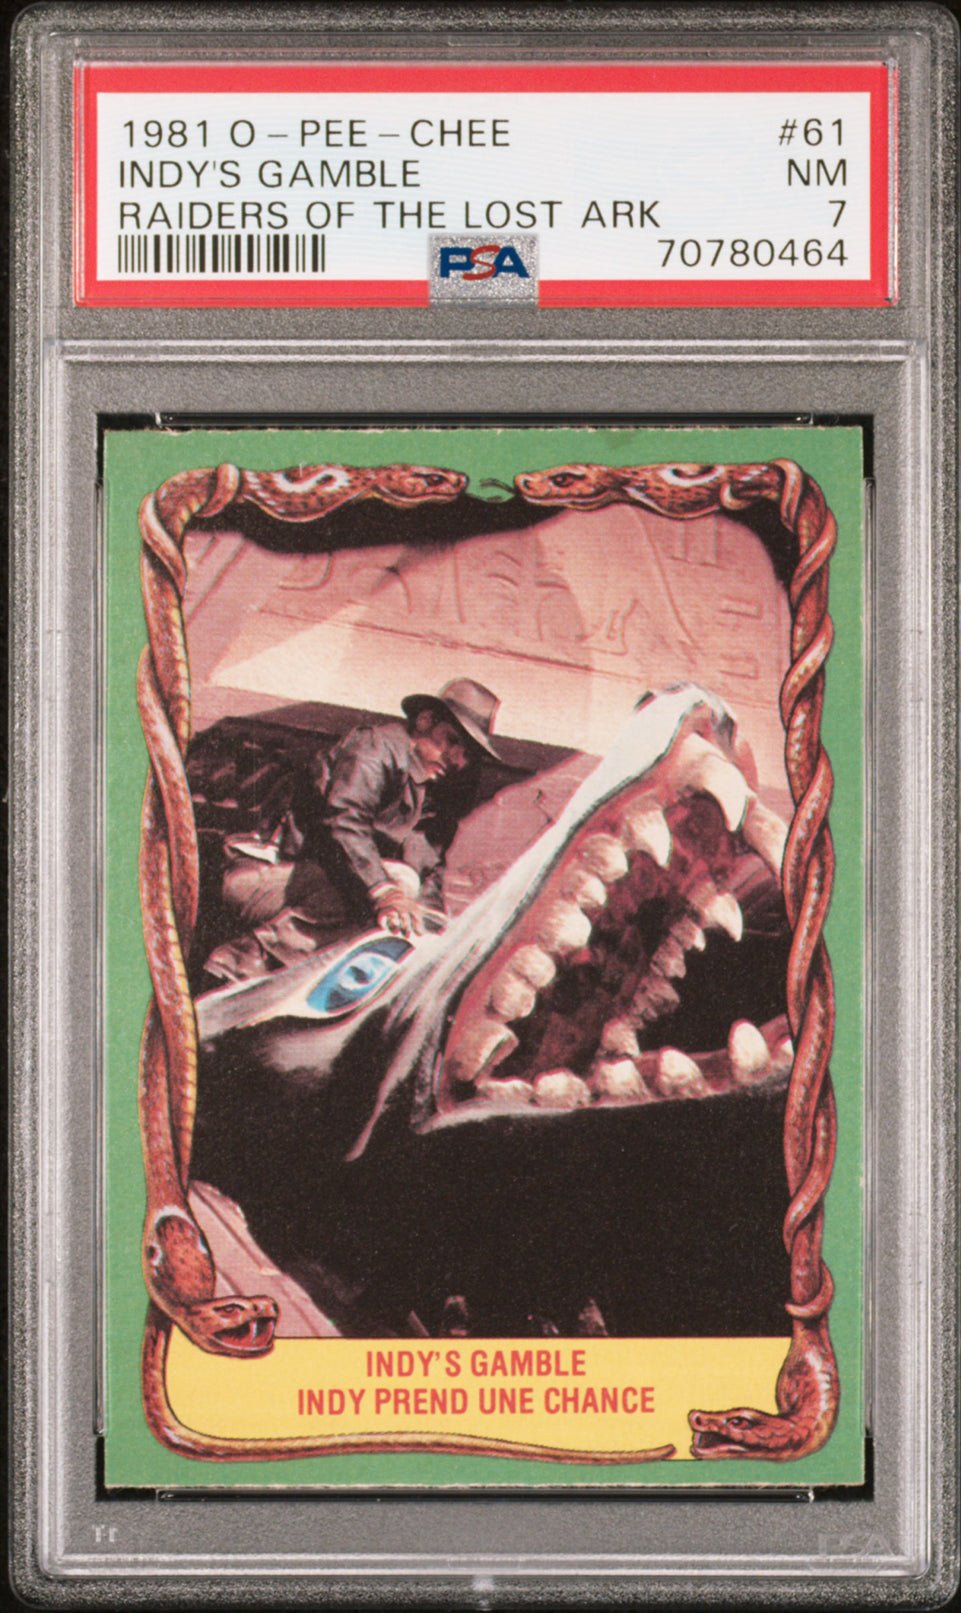 INDY'S GAMBLE PSA 7 1981 O-Pee-Chee Raiders of the Lost Ark #61 Indiana Jones Base Graded Cards - Hobby Gems